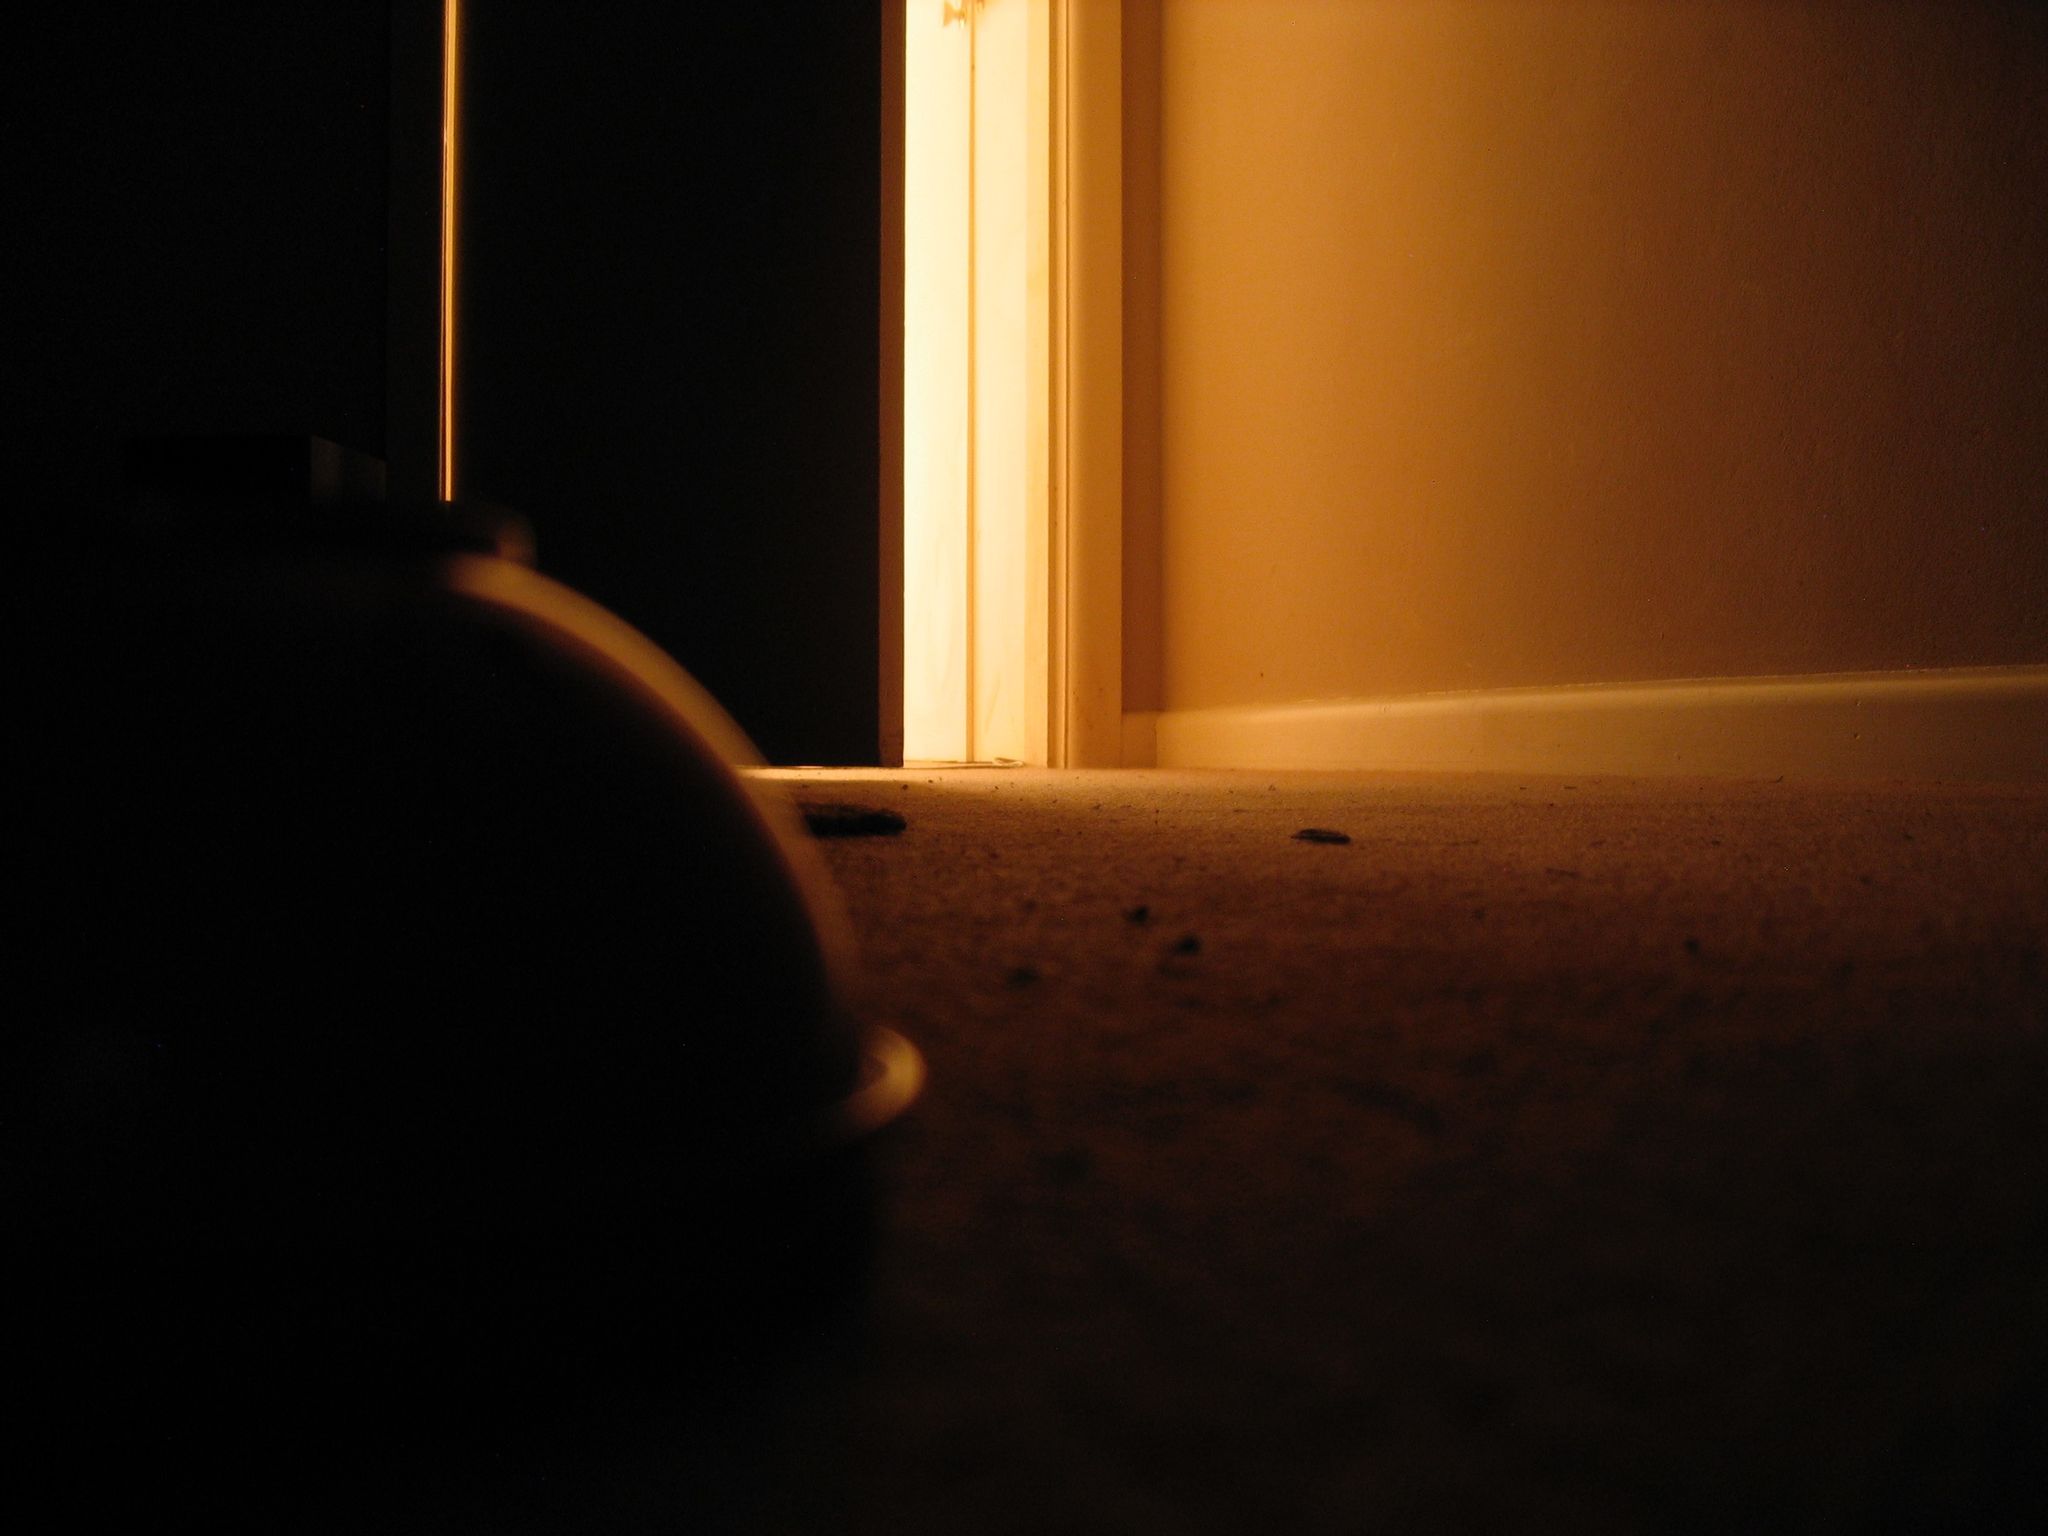 A long exposure photo looking out towards a partially-closed door, taken with the camera sitting on the floor. The room is dark and there's very warm light coming in from the doorway. An upside-down plastic toy bowl is out of focus at the left of frame.